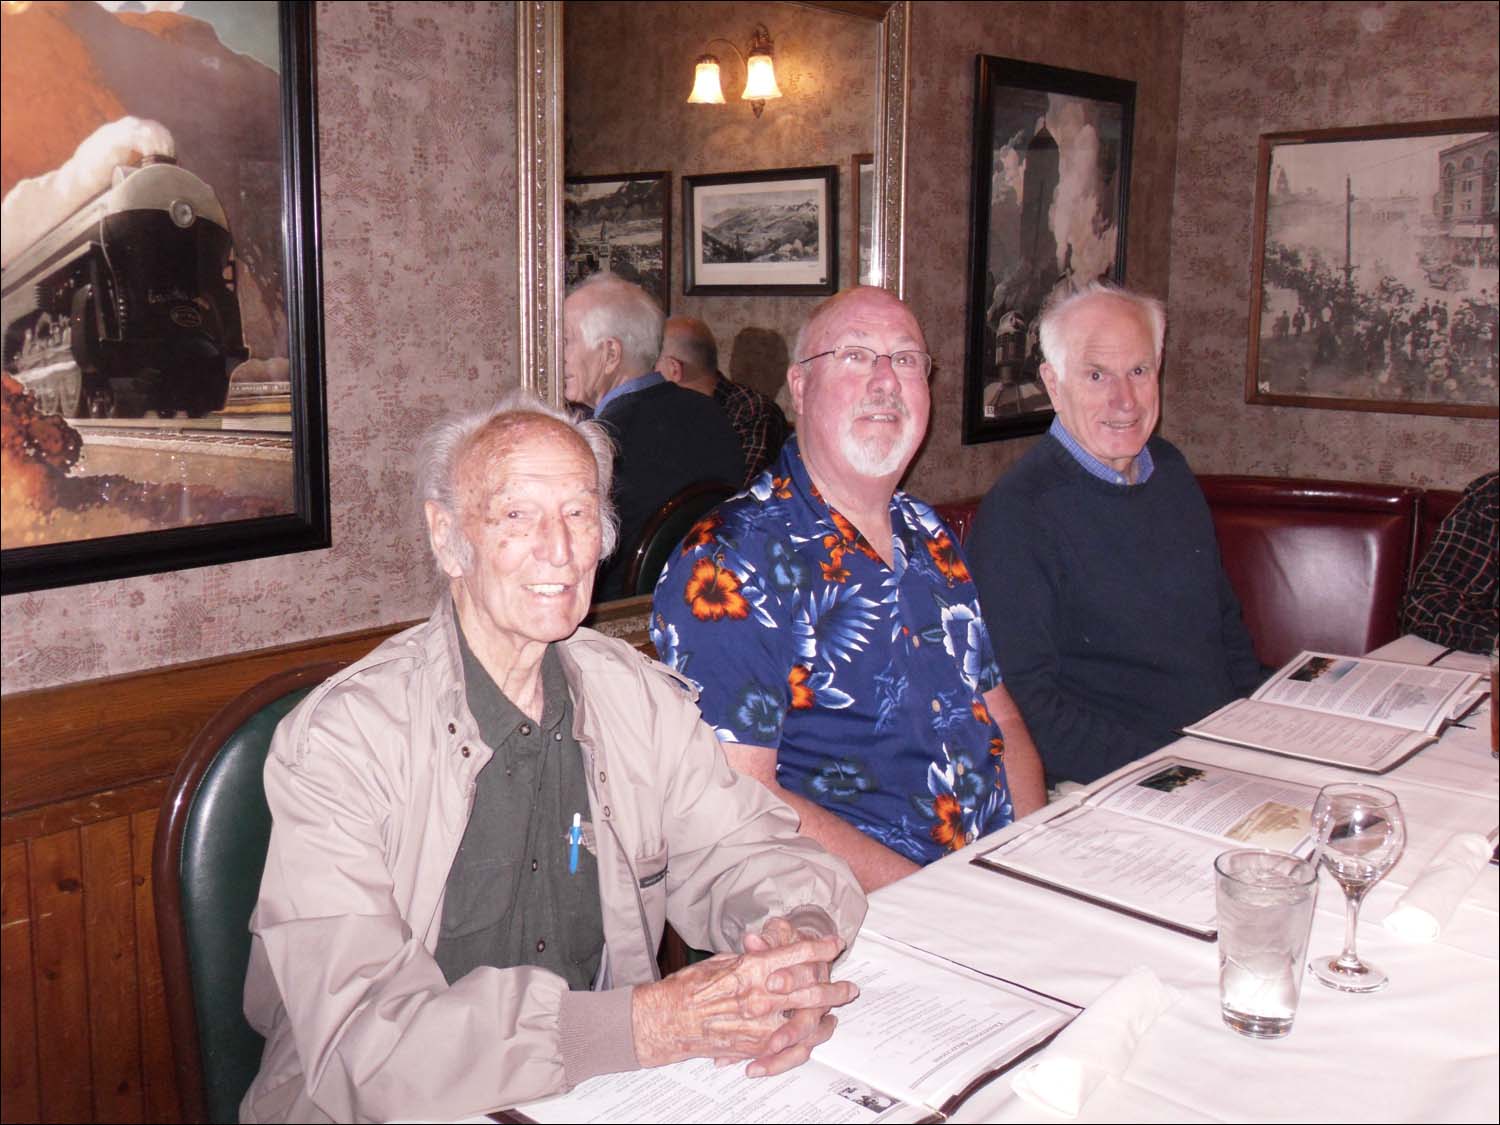 Dinner at The Depot, Colorado Springs, CO-Pax, Dad and Rusty-the 3 Amigos